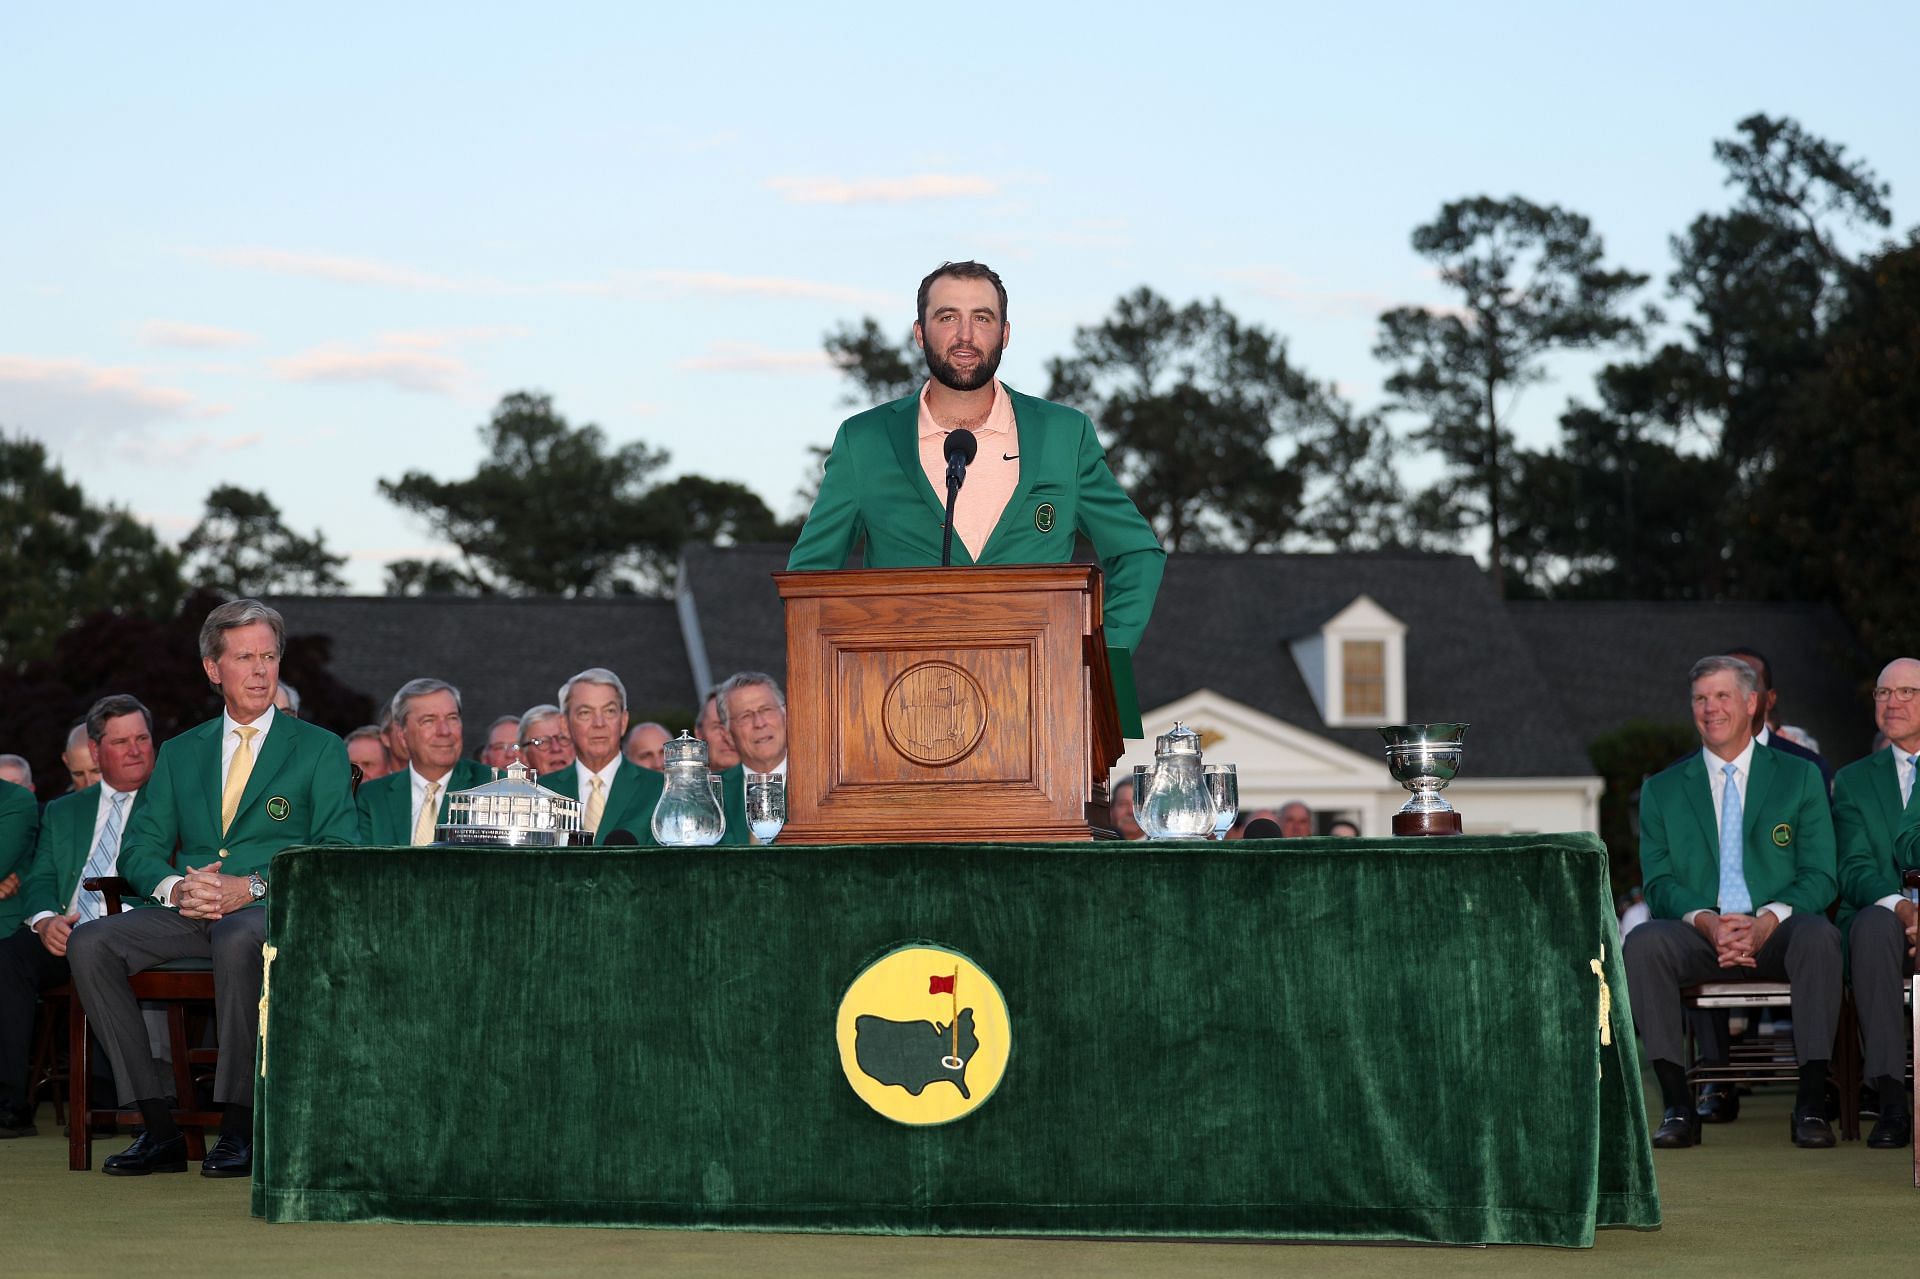 Scottie Scheffler talks about “2 great gifts” after winning the Masters